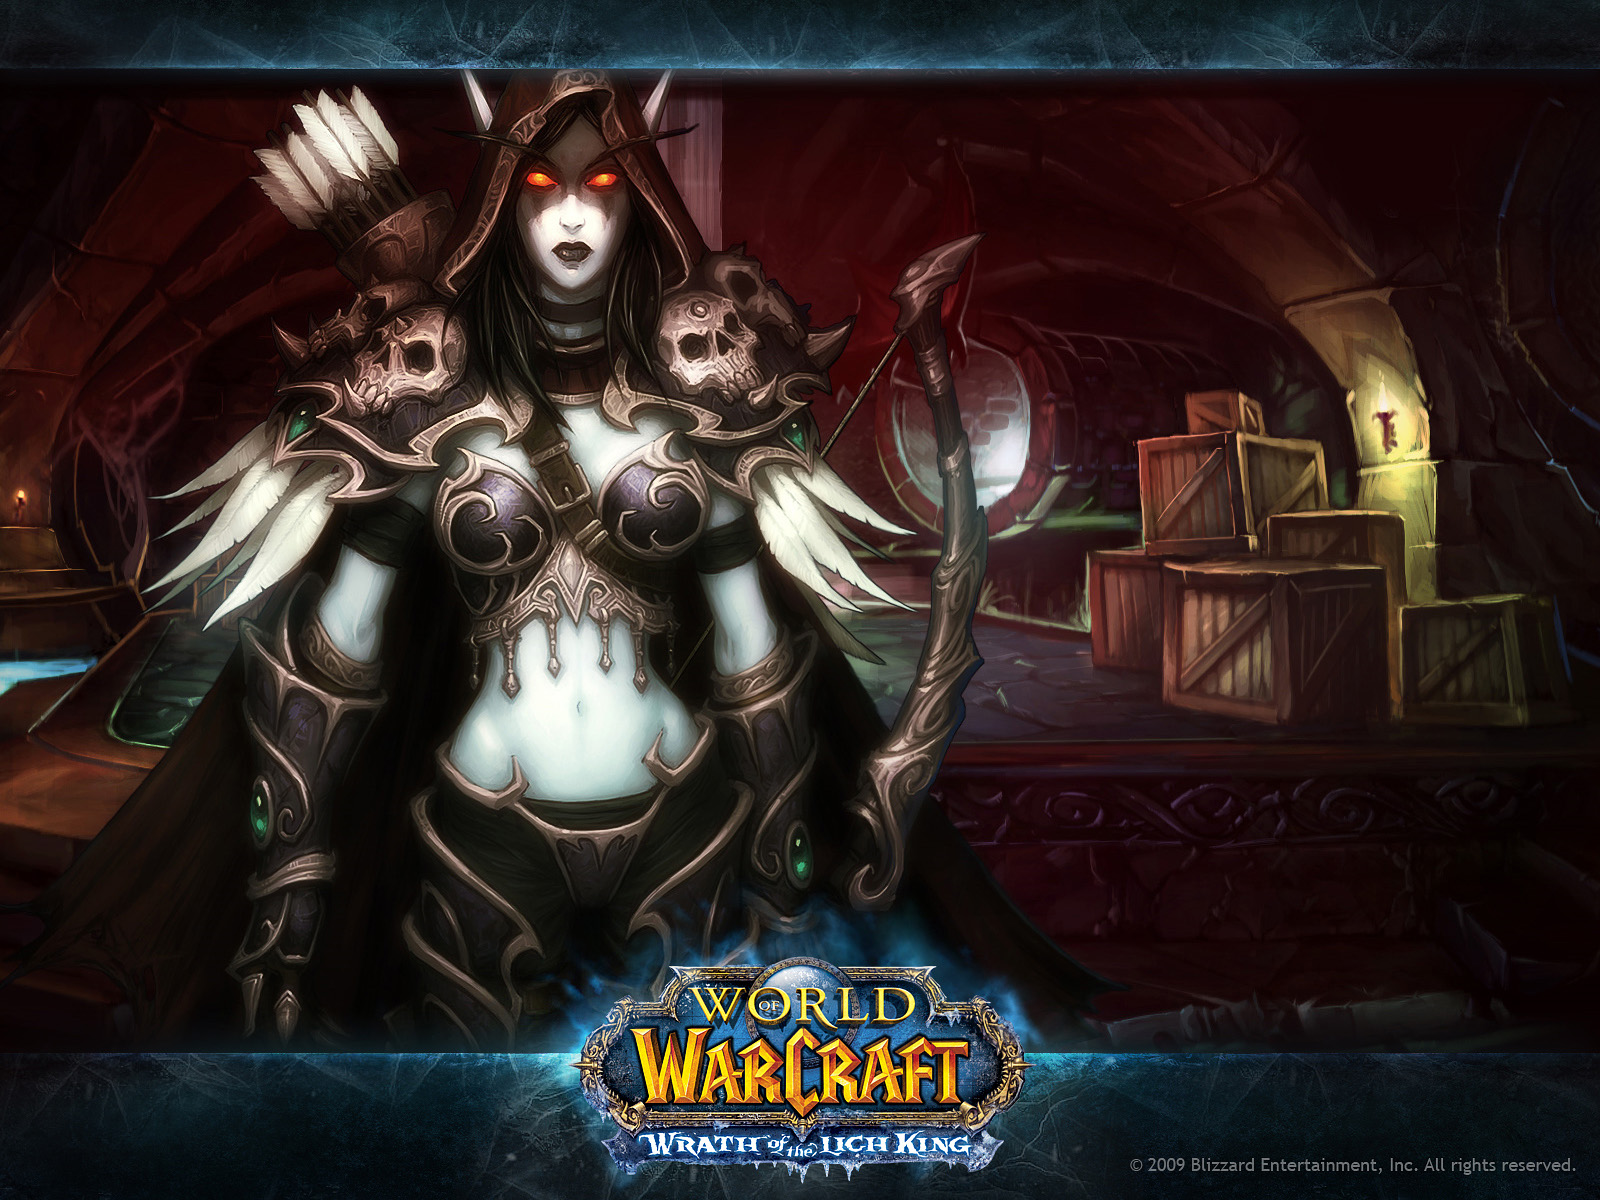  World of Warcraft Background and PostersHope you like this HD WoW